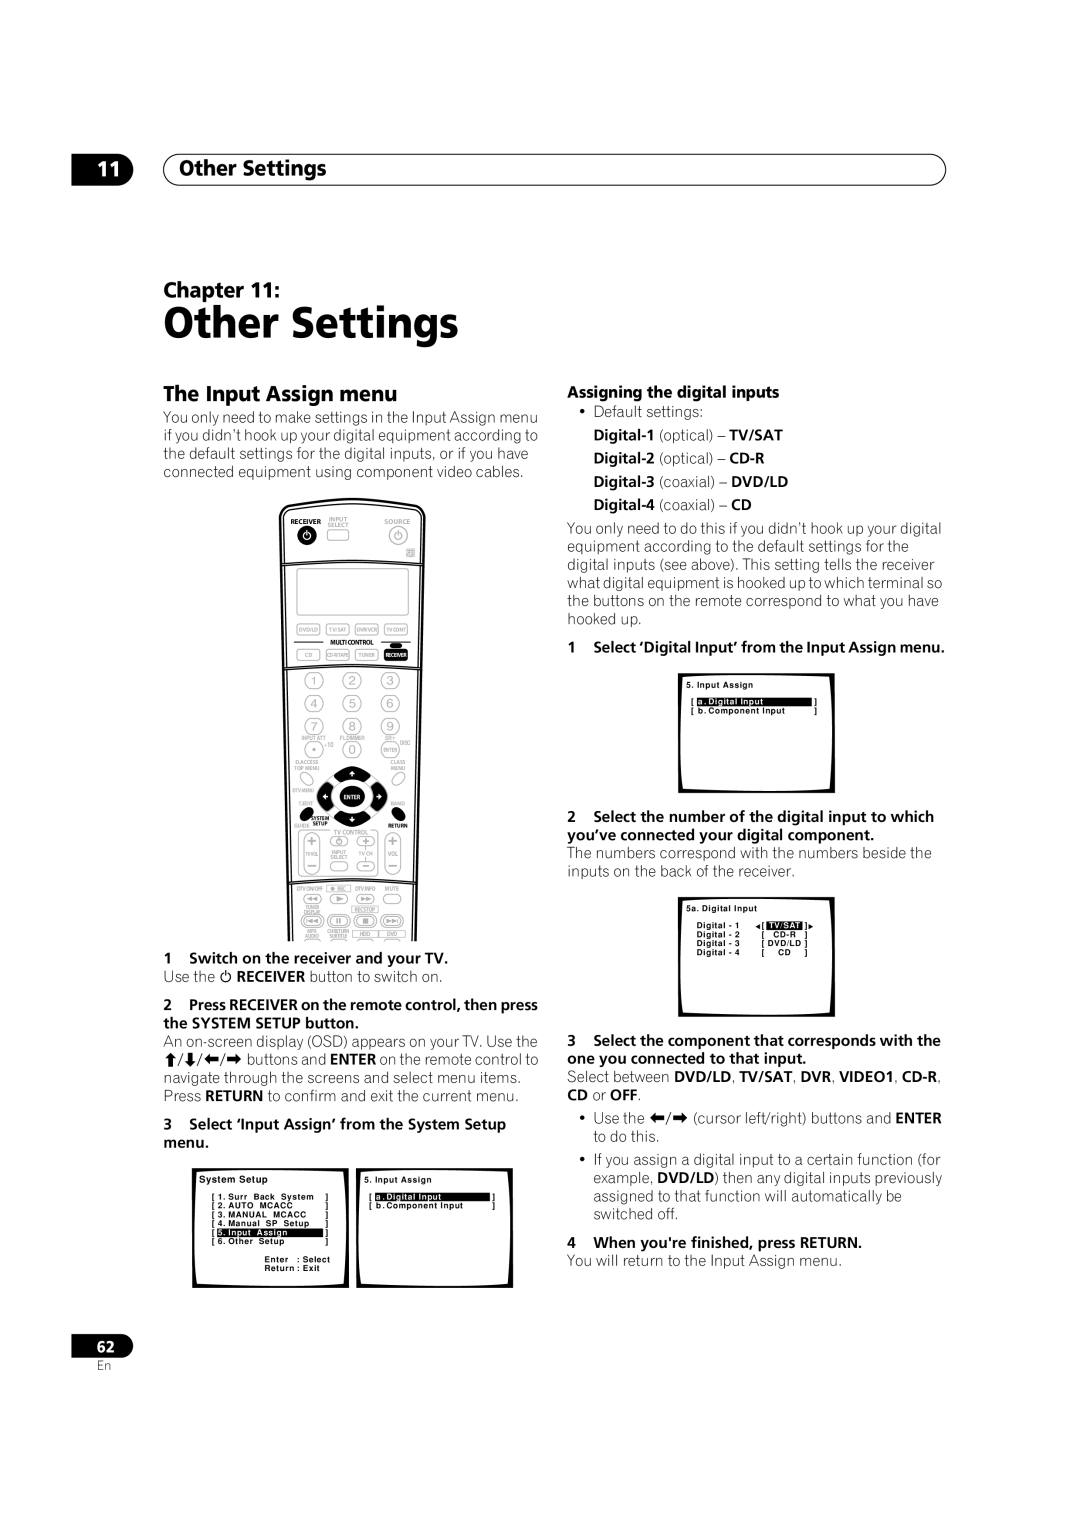 Pioneer VSX-1015TX operating instructions 11Other Settings Chapter, The Input Assign menu, Assigning the digital inputs 